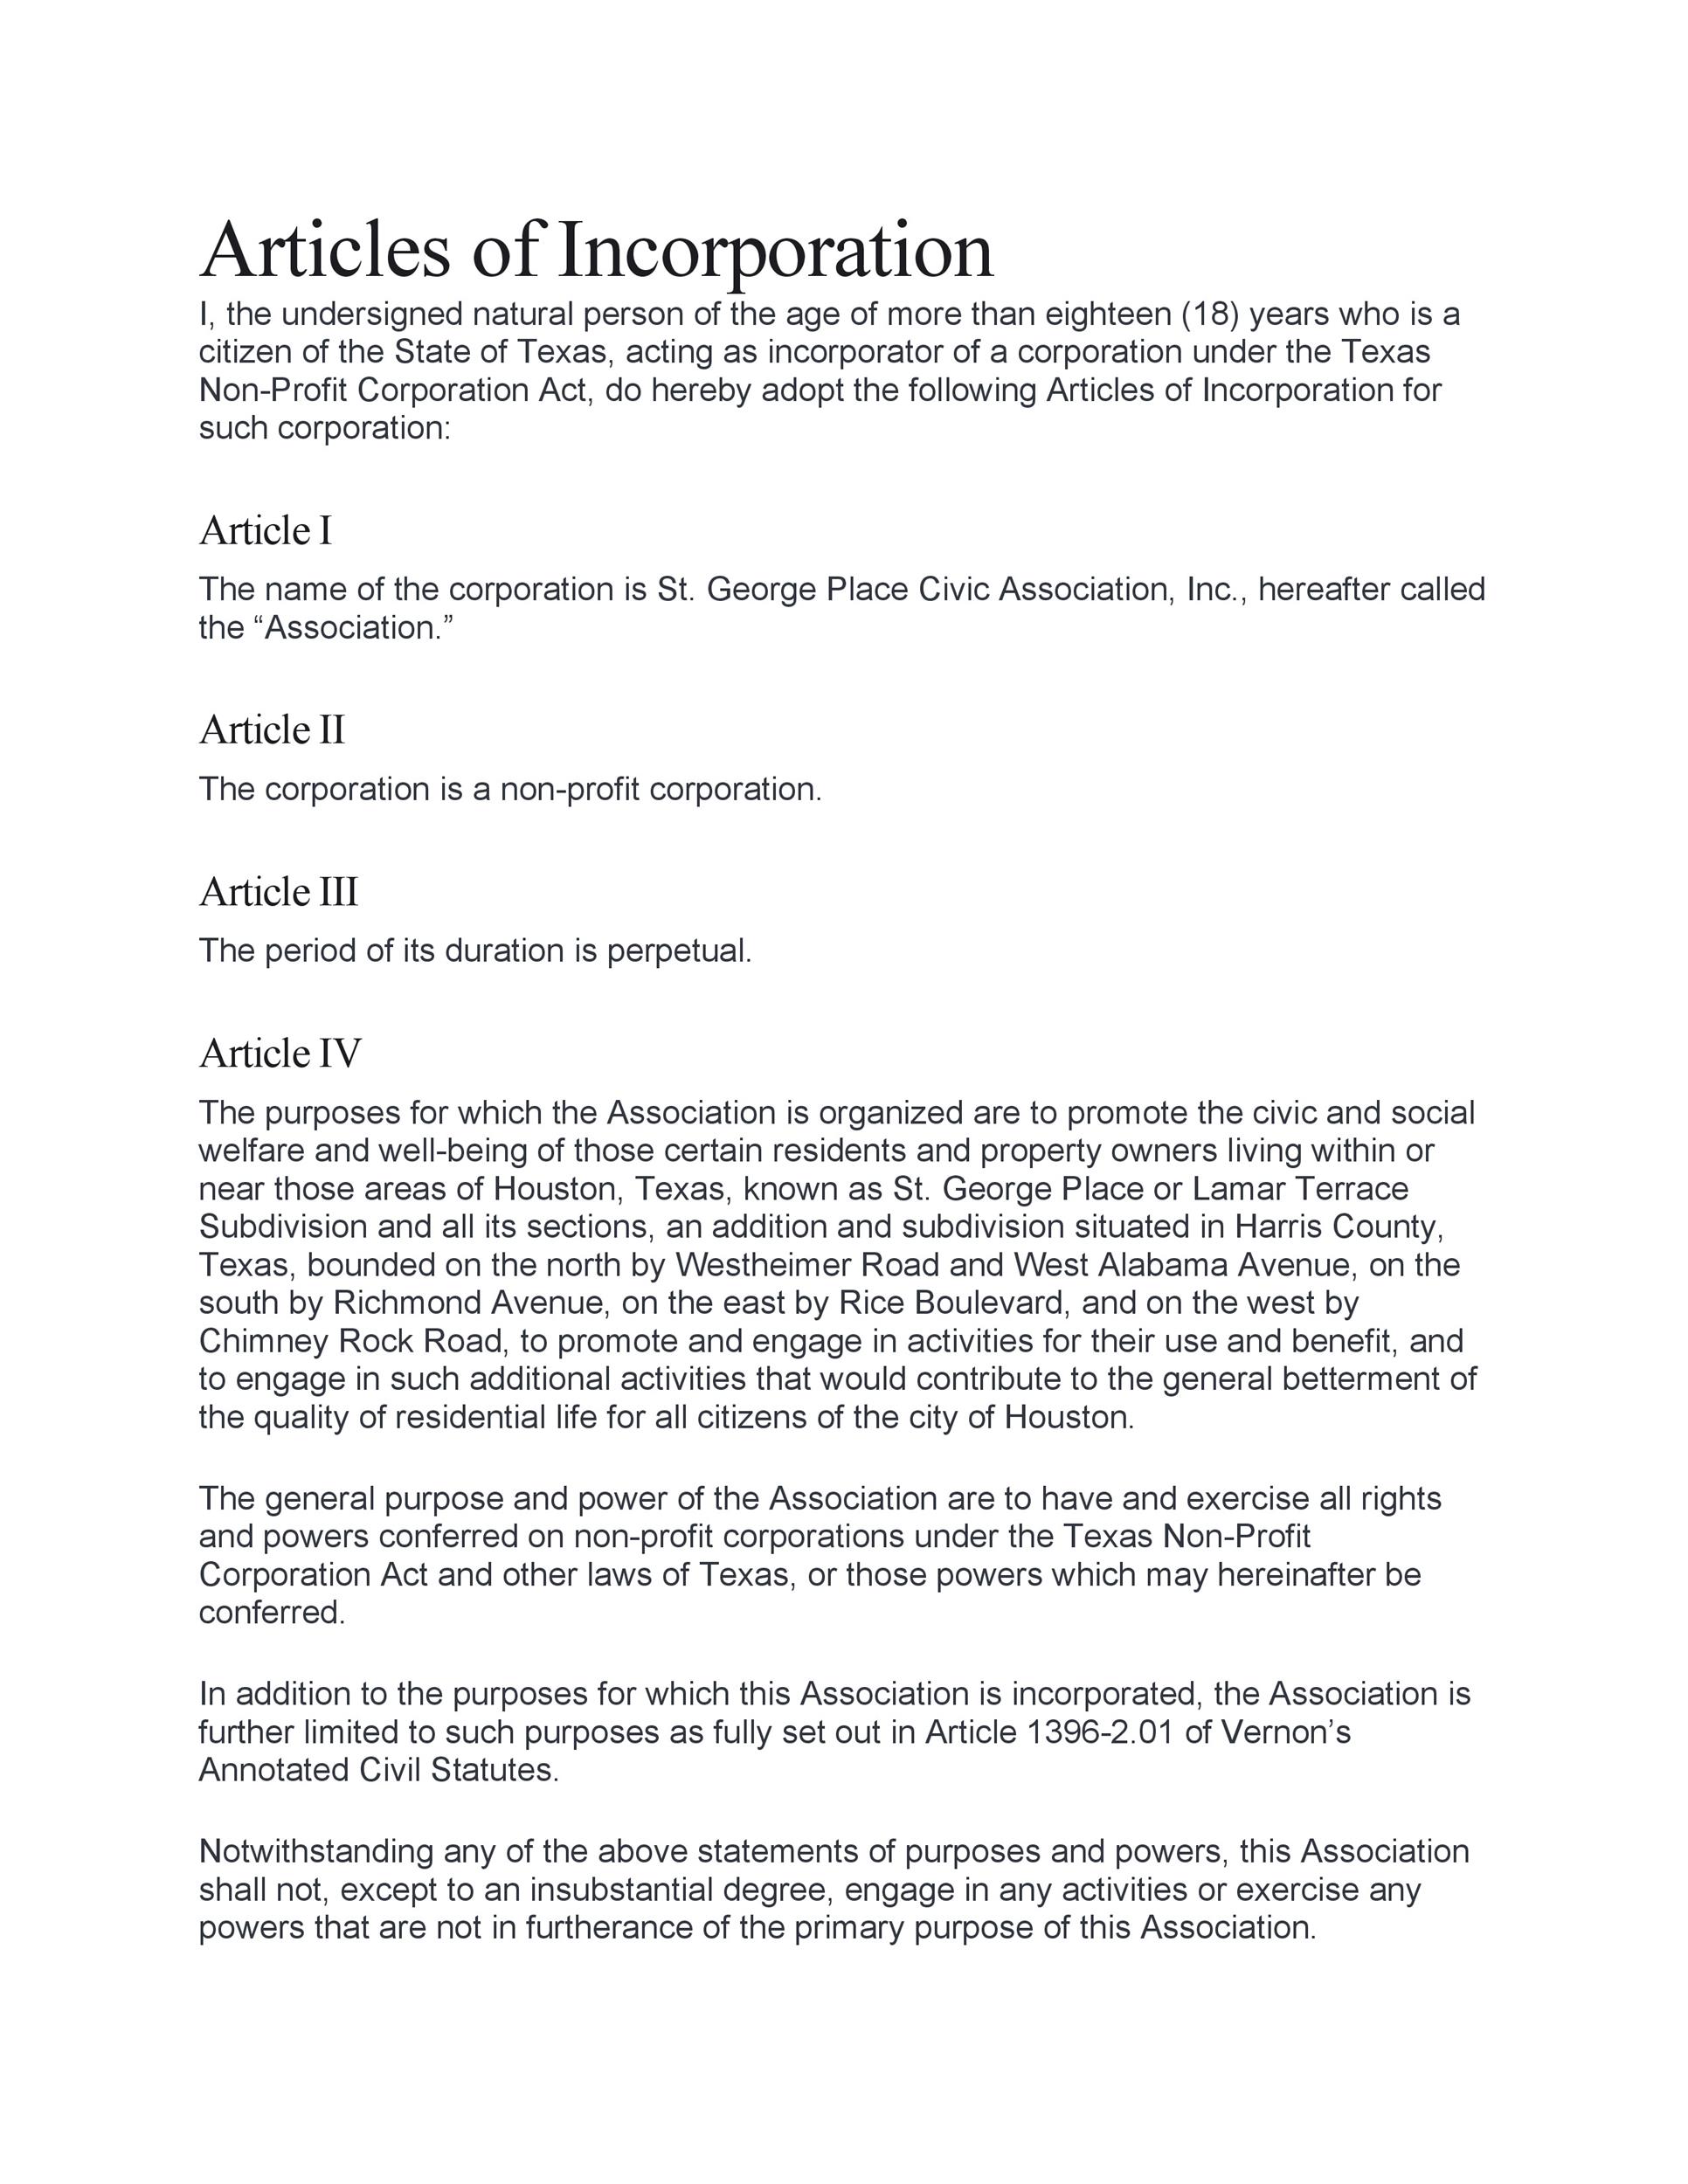 Free articles of incorporation template 10